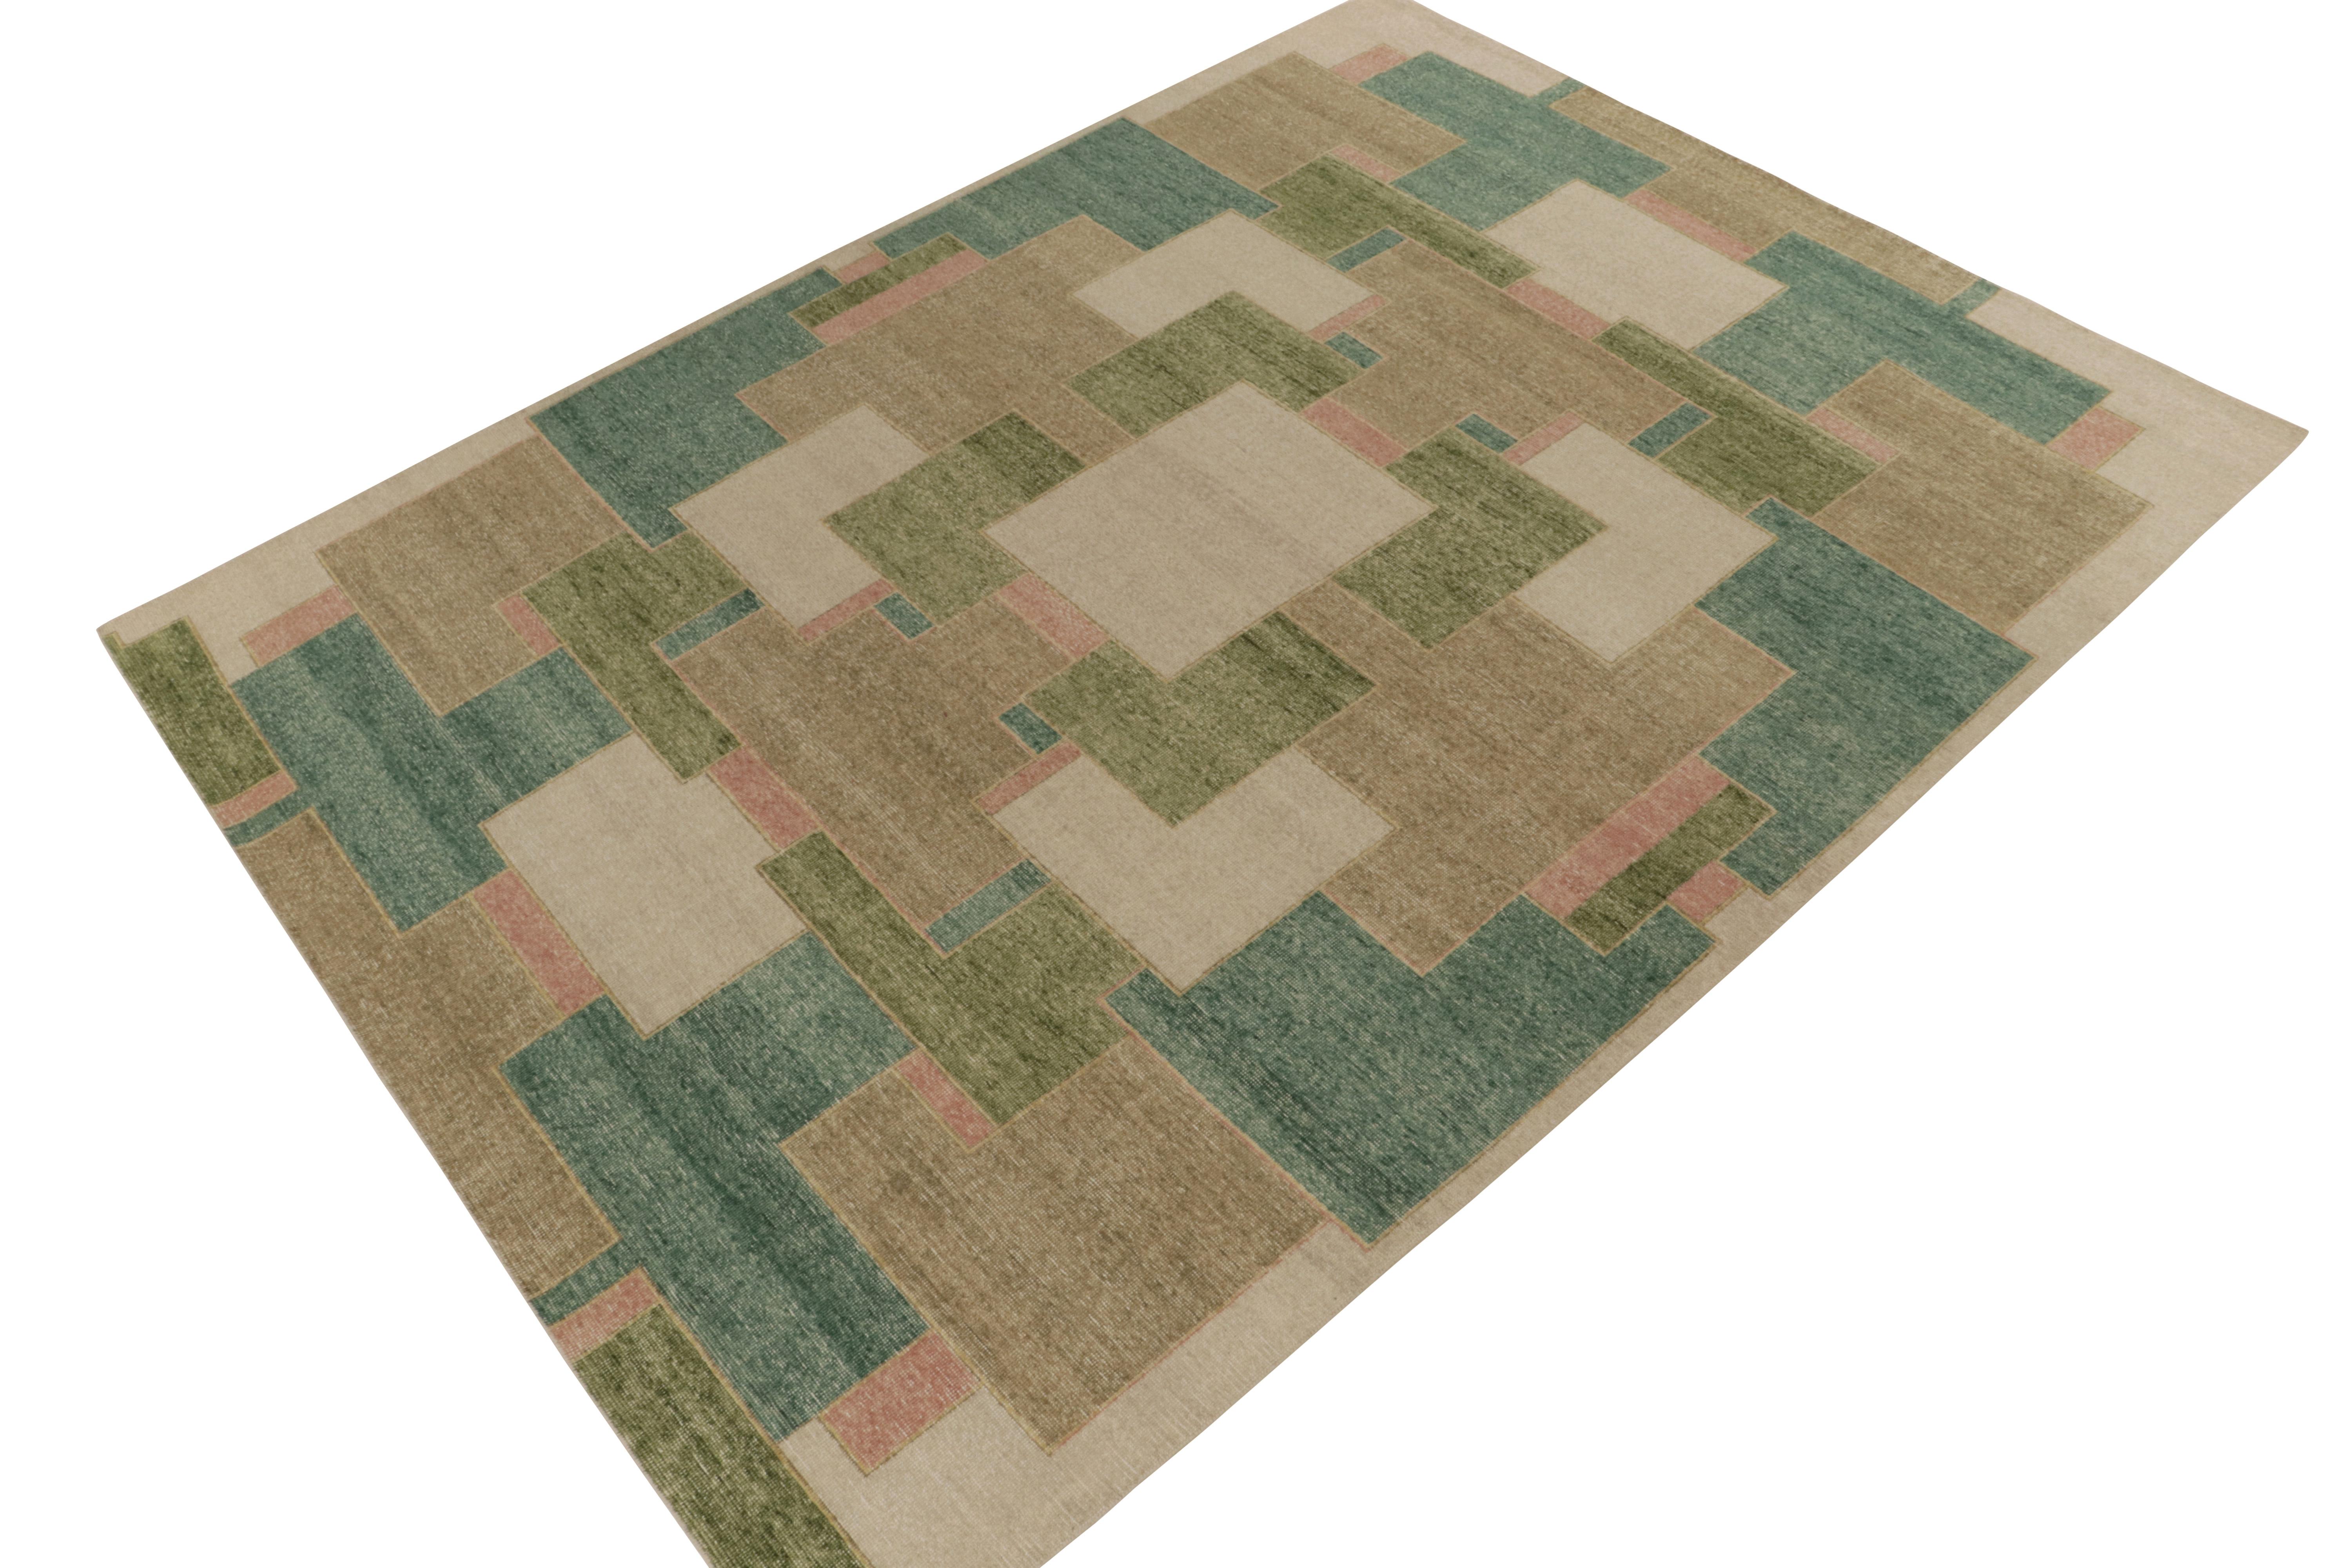 A scintillating 9x12 hand-knotted wool rug from Rug & Kilim’s Homage Collection. 

On the Design: This Rustic Modern design is inspired by cubist art deco sensibilities in tones of green, beige-brown & salmon pink, brilliantly capturing shabby